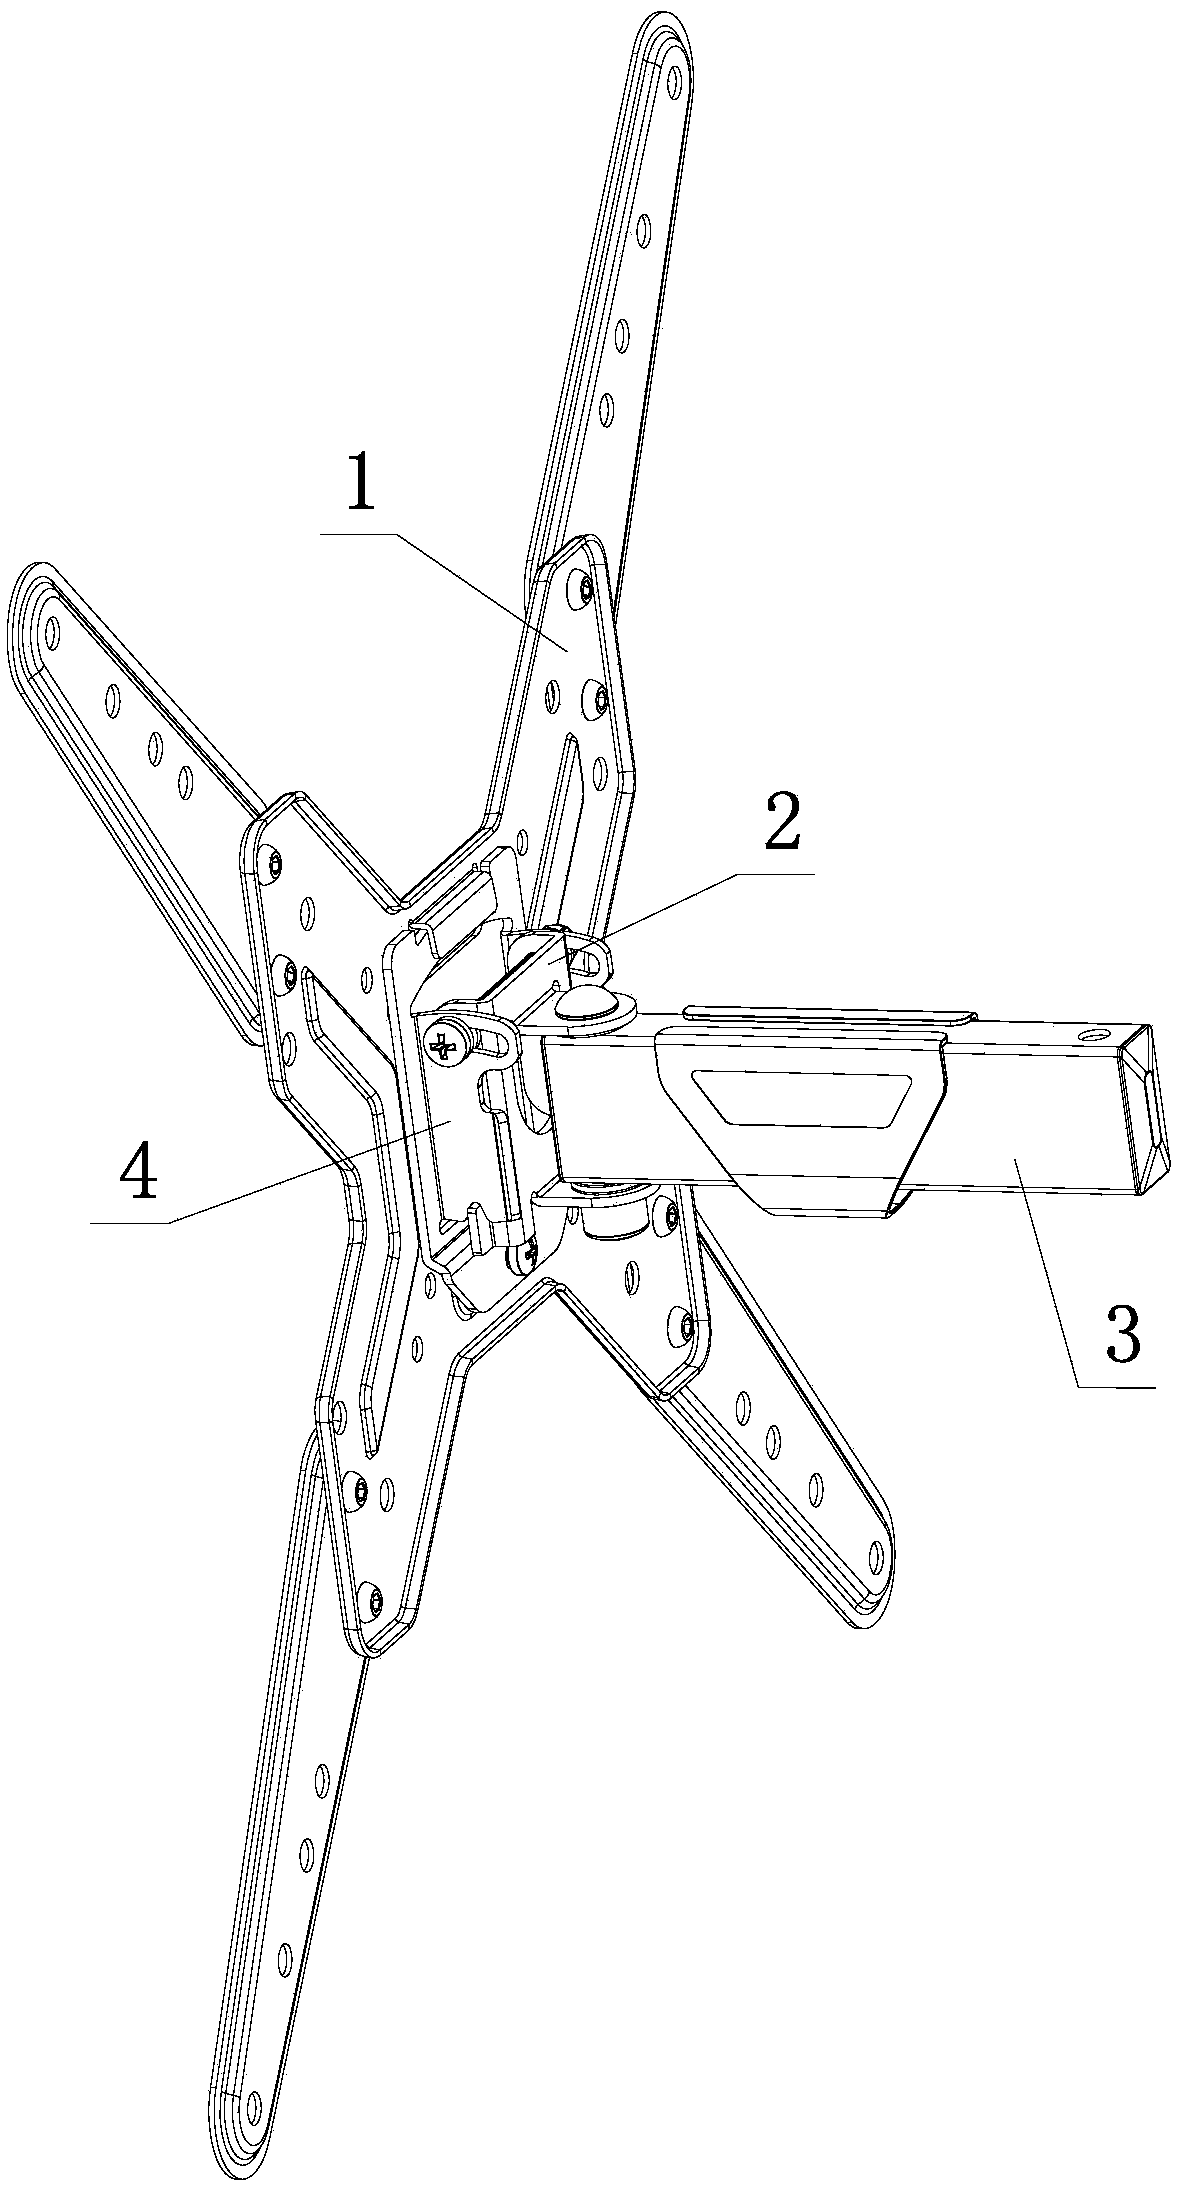 Display support head part connecting structure